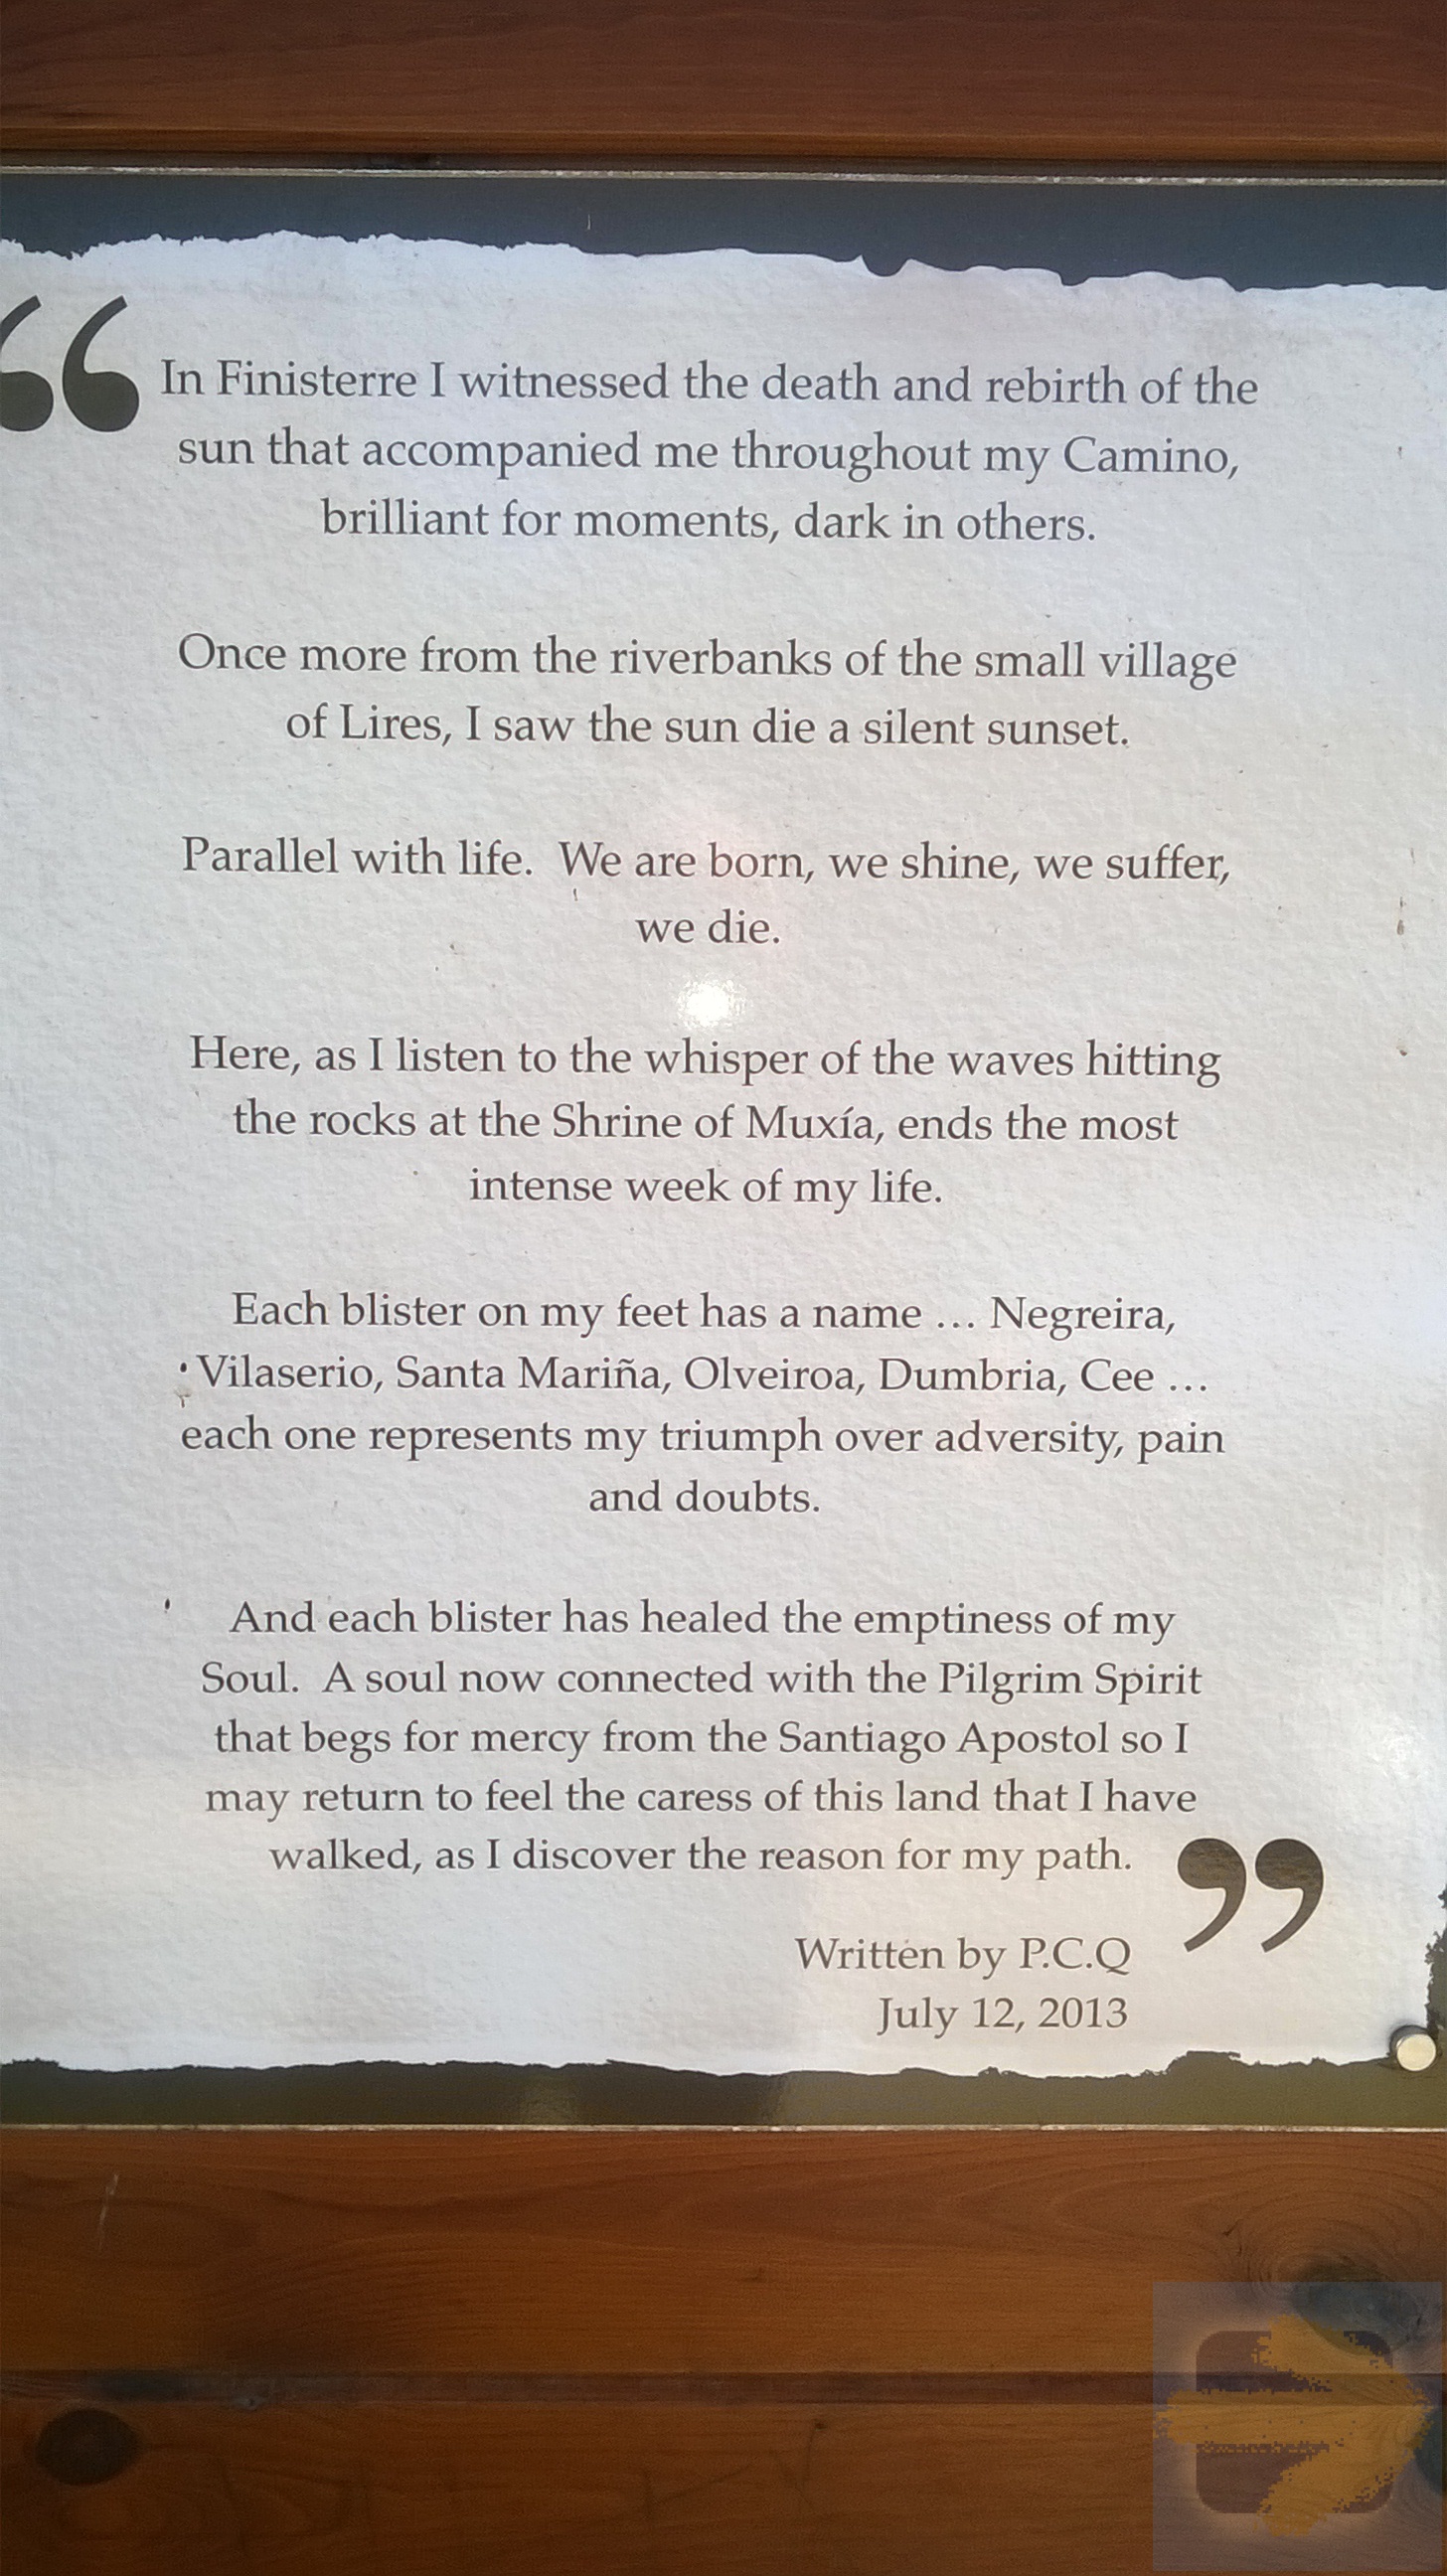 Poem about the Camino